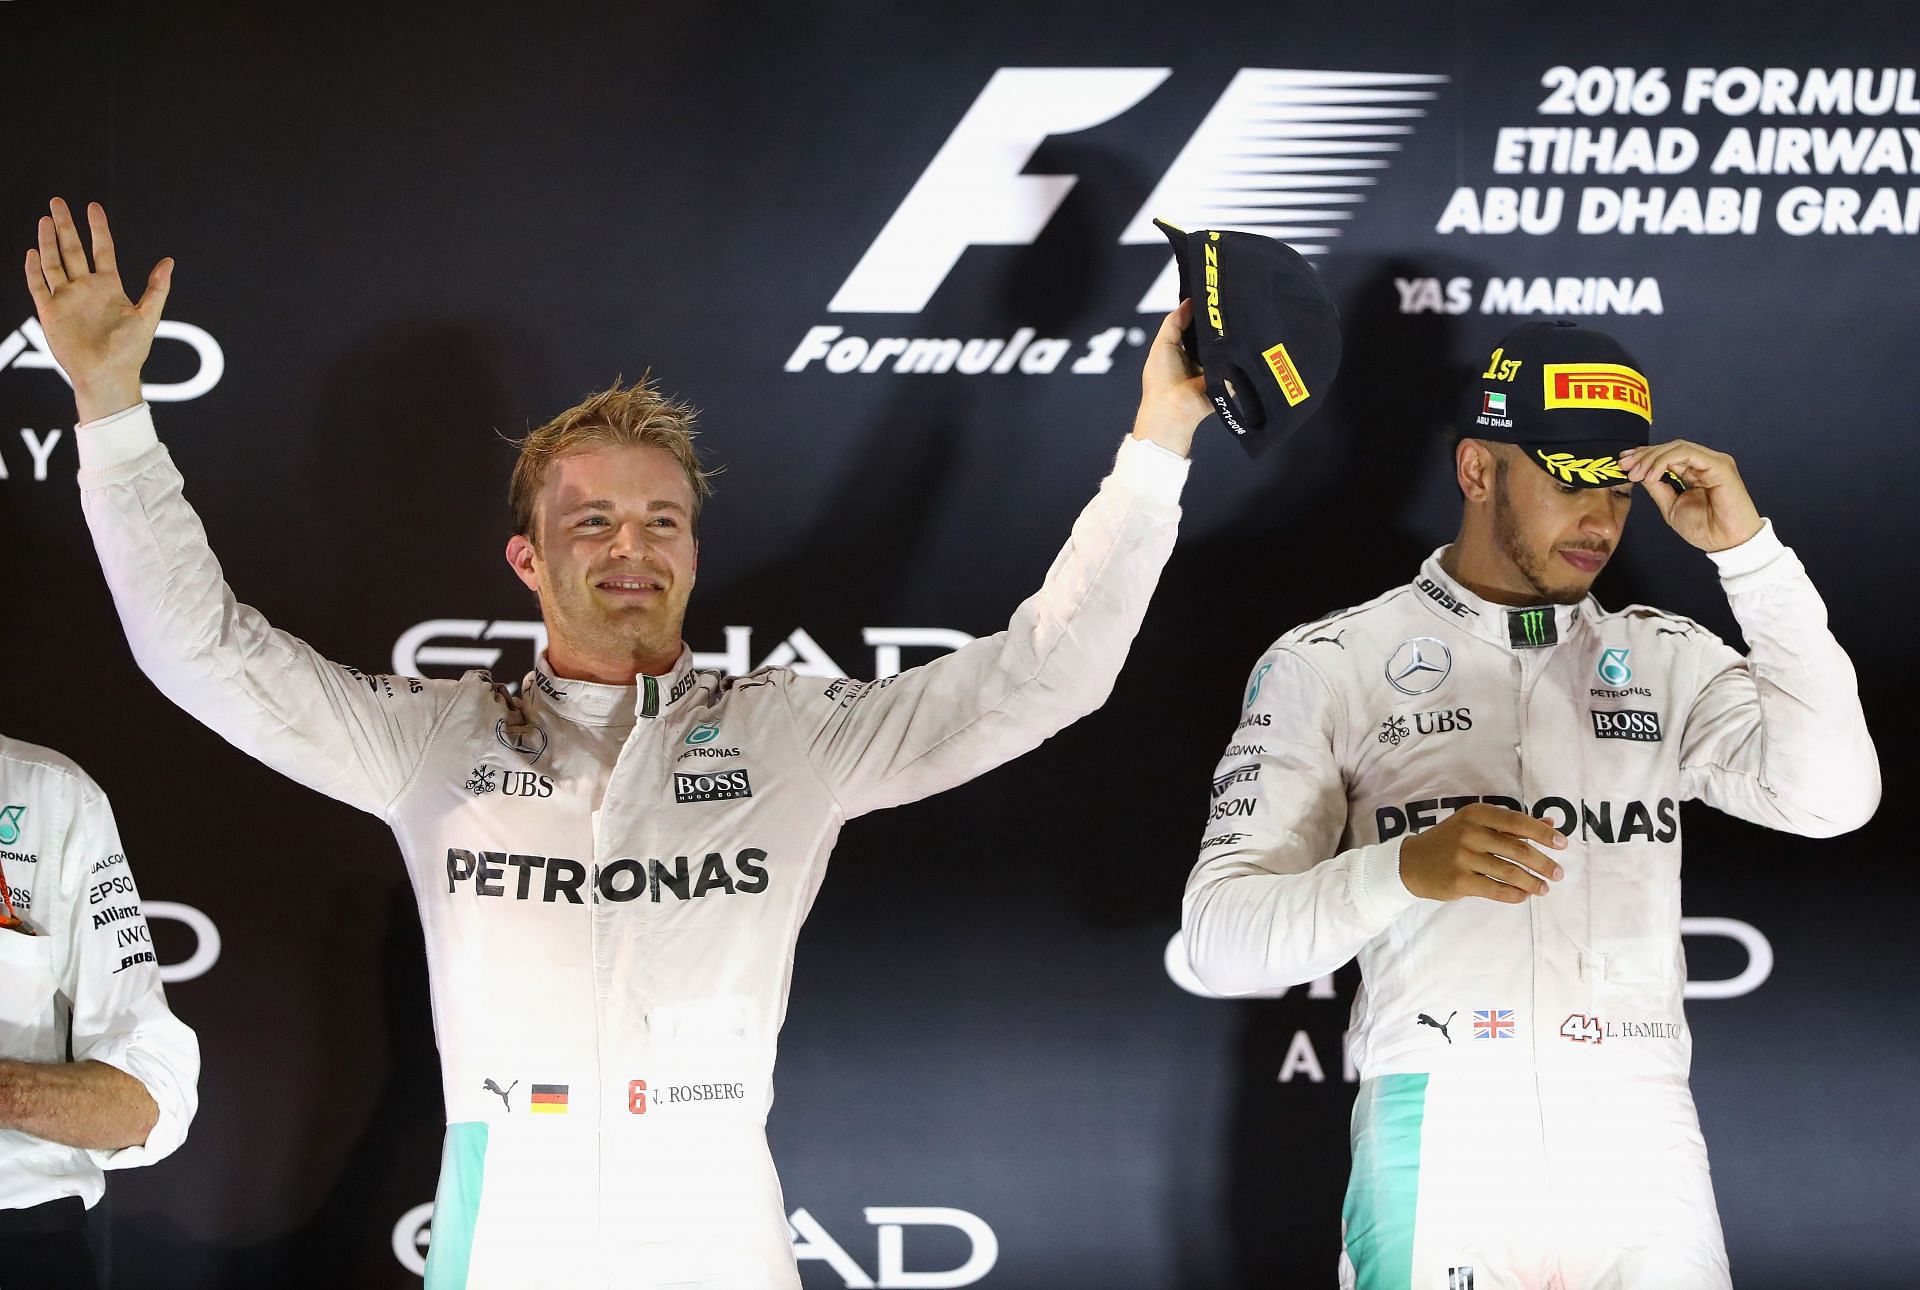 Lewis Hamilton and Nico Rosberg had an extremely tense relationship at Mercedes